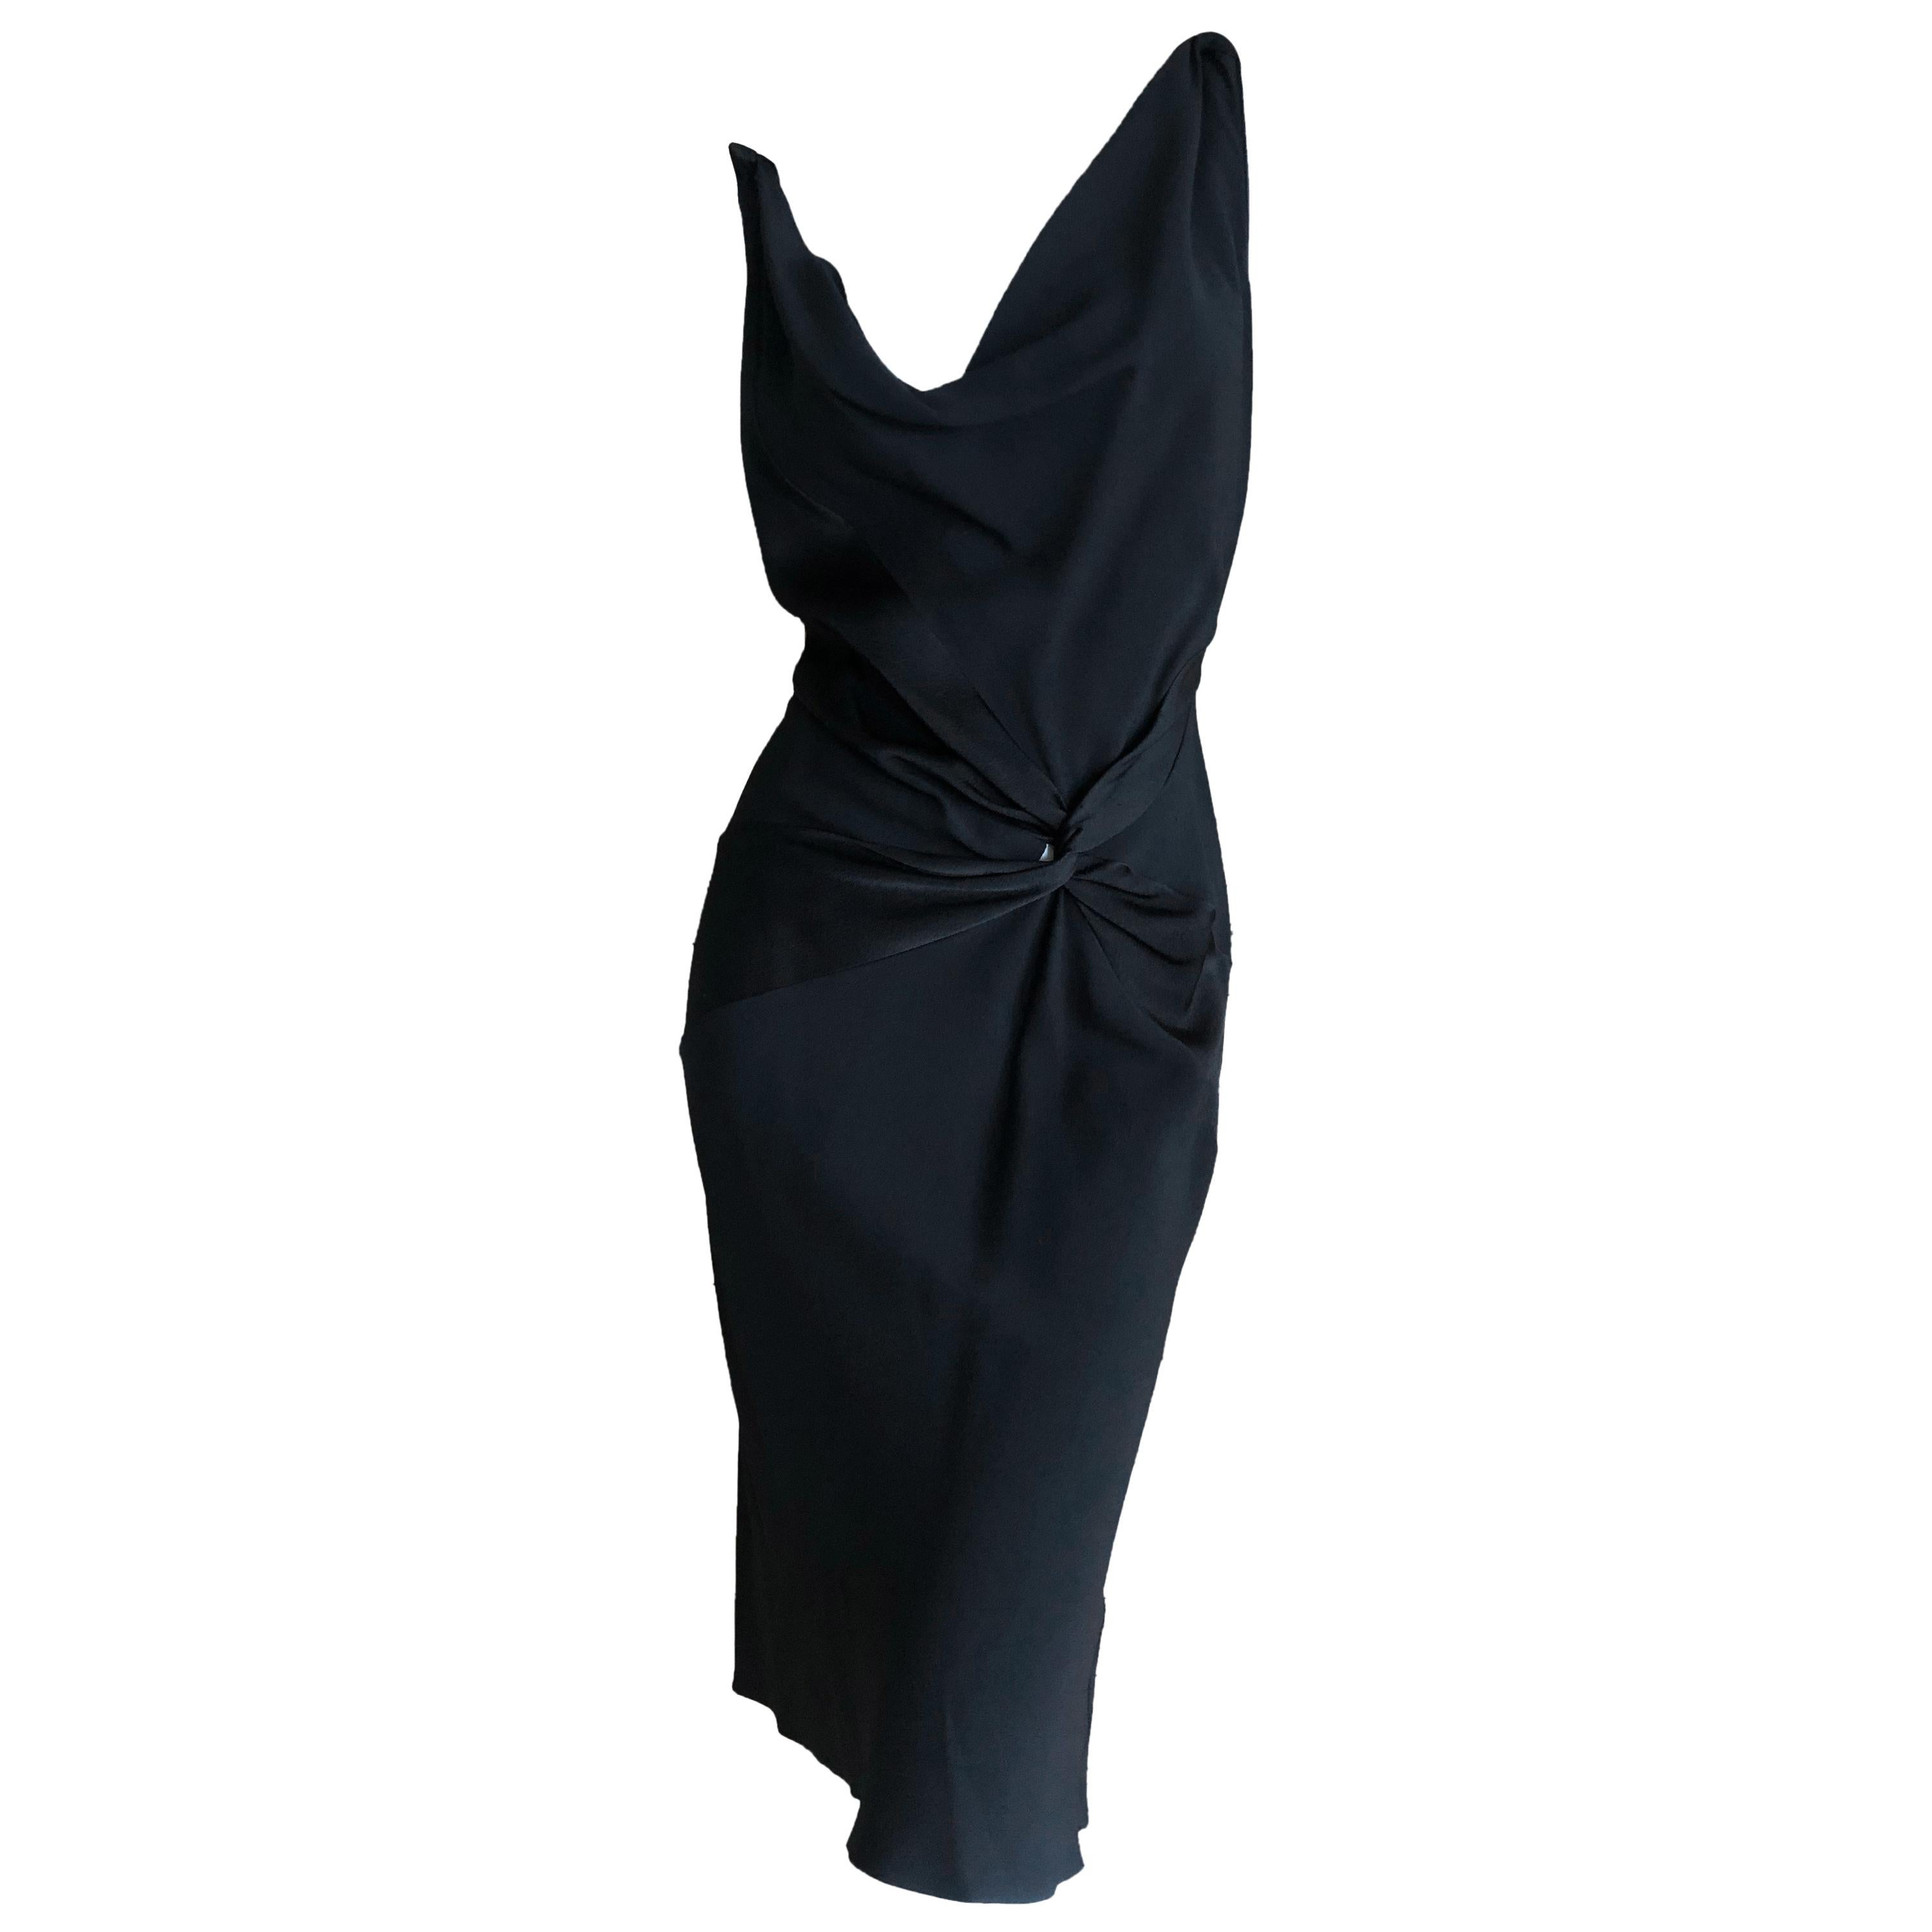 John Galliano Vintage 1990's Low Cut Black Shine and Matte Knot Dress For Sale